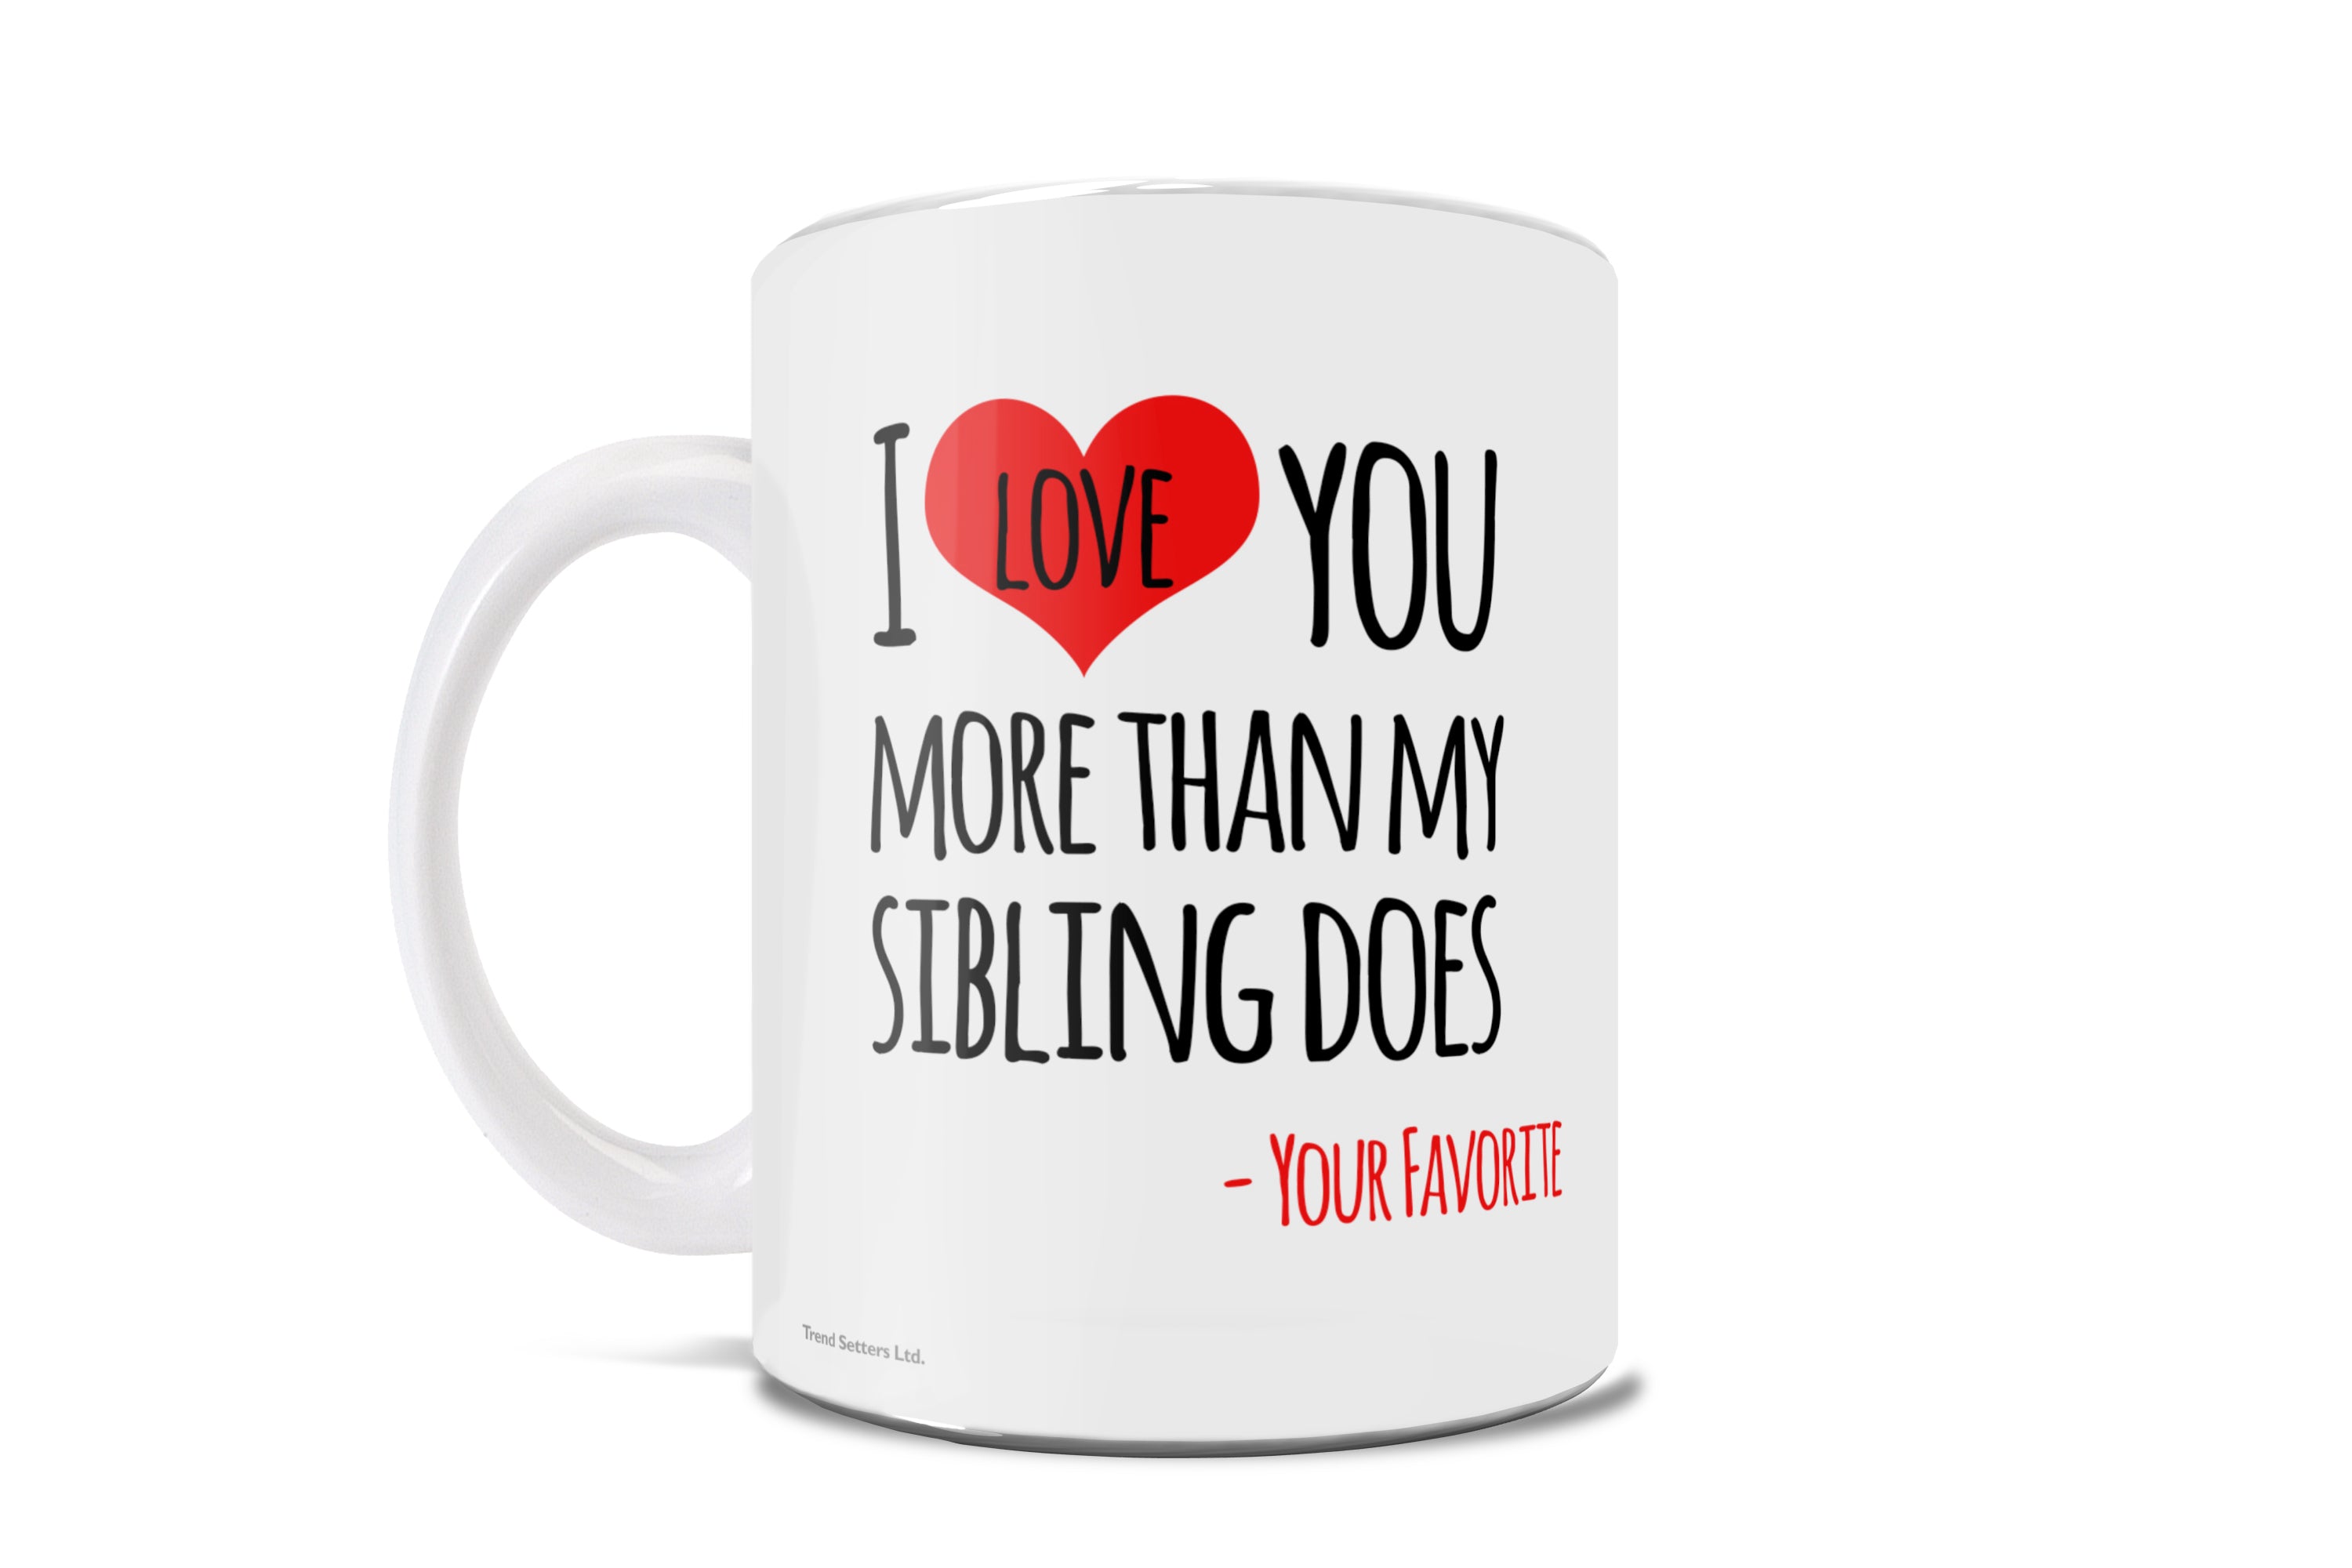 Parent Collection (I Love You More Than My Sibling Does) 11 oz White Ceramic Mug